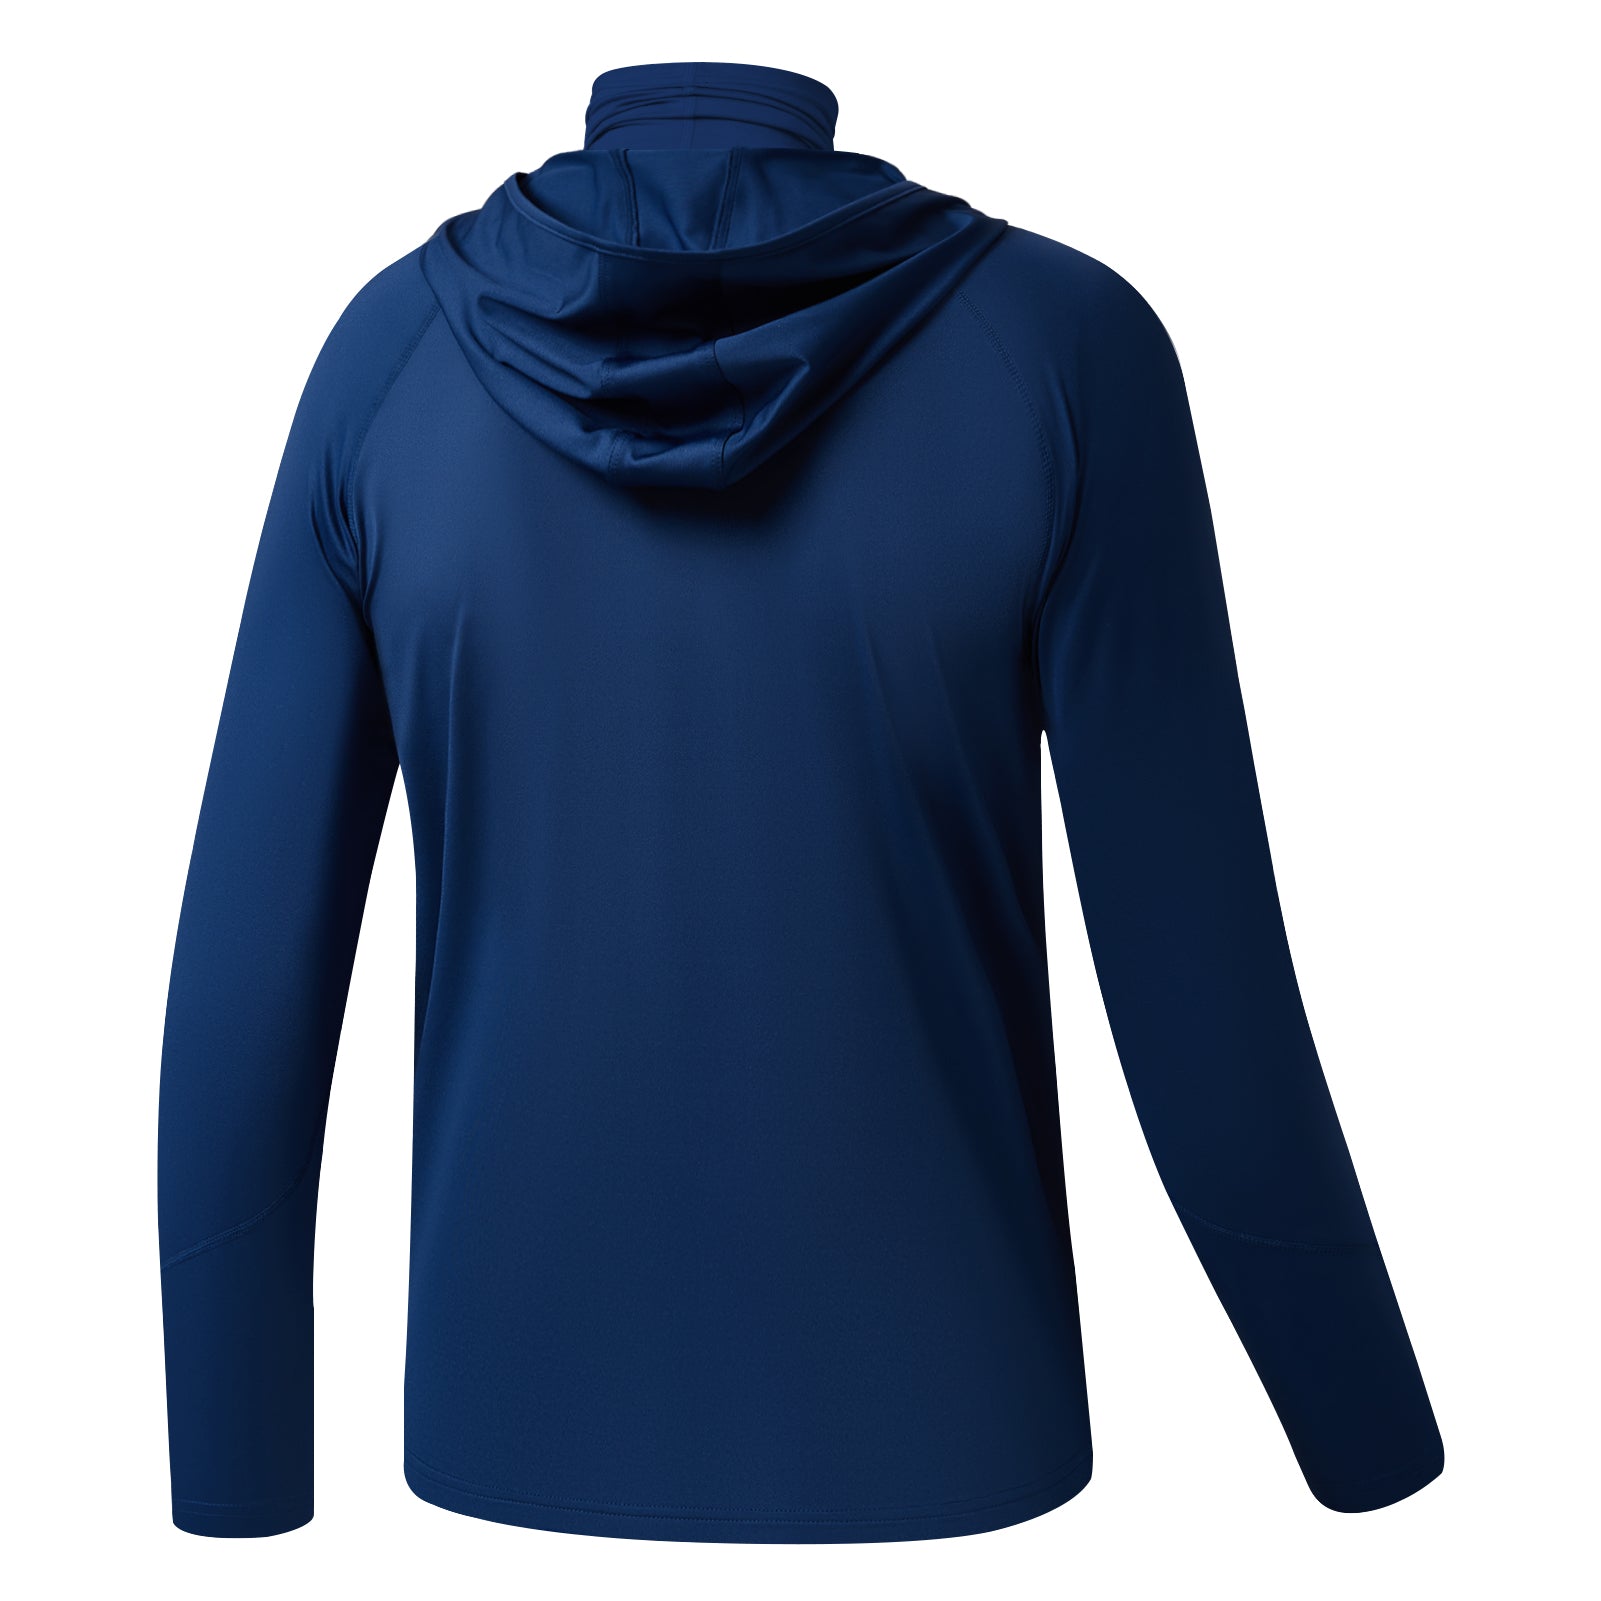 Youth UPF 50+ Hooded Sun Shirt with Mask